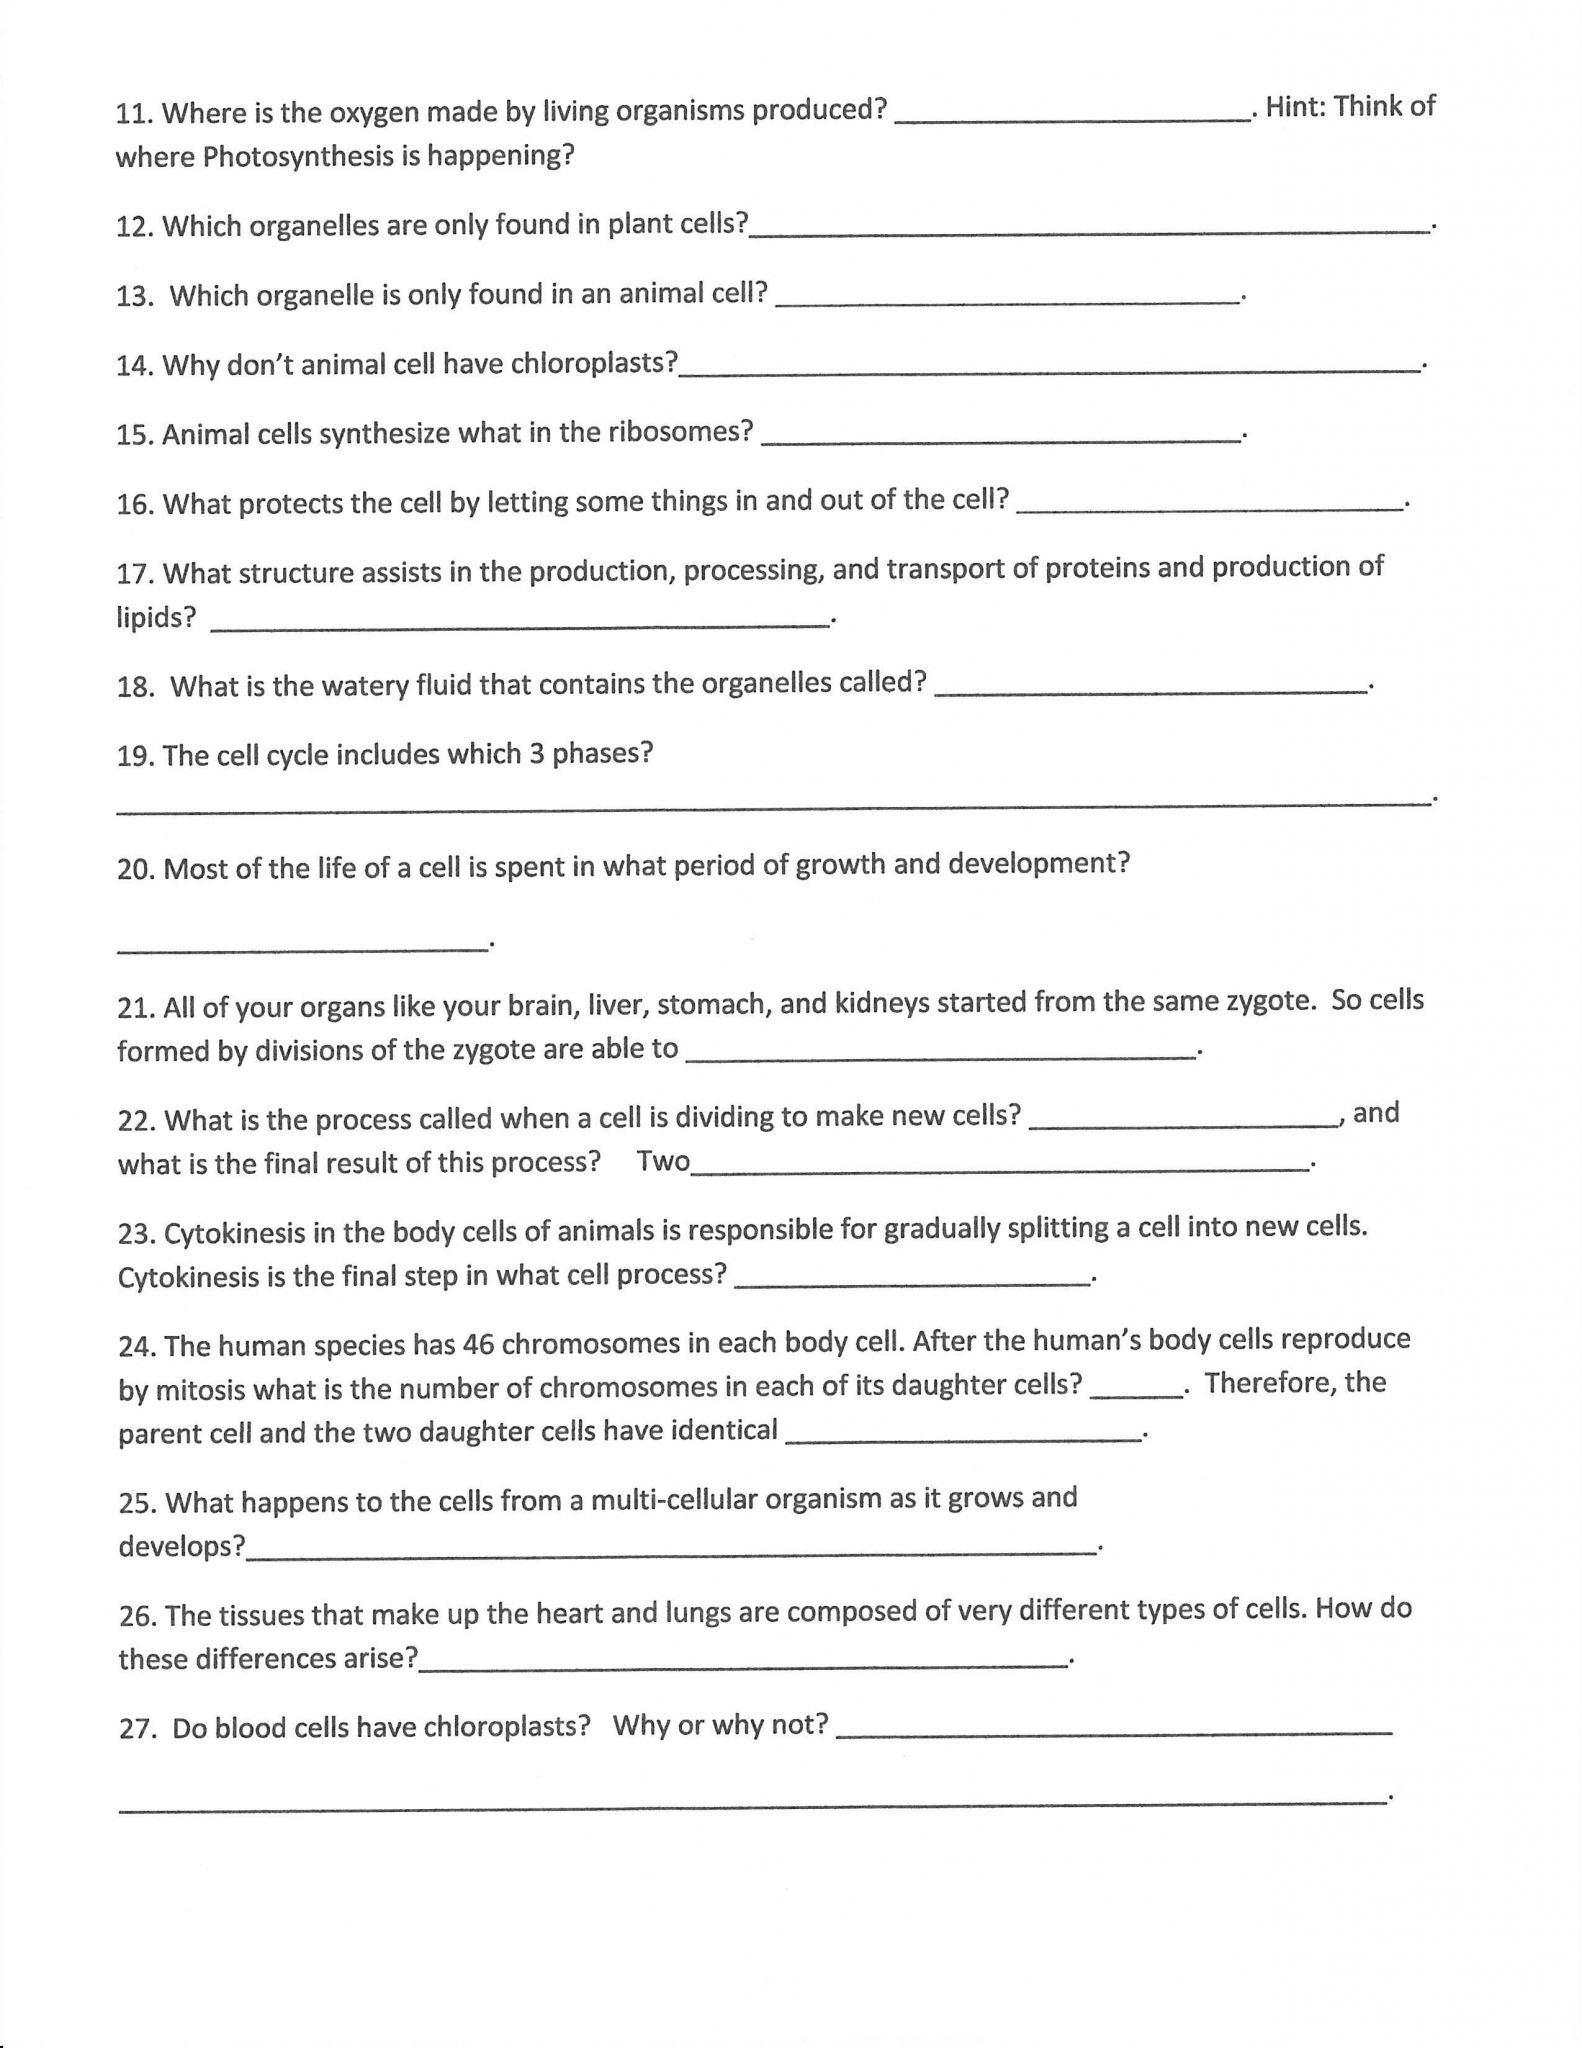 Simple and Compound Interest Practice Worksheet Answer Key as Well as Fbplus Worksheet Names List